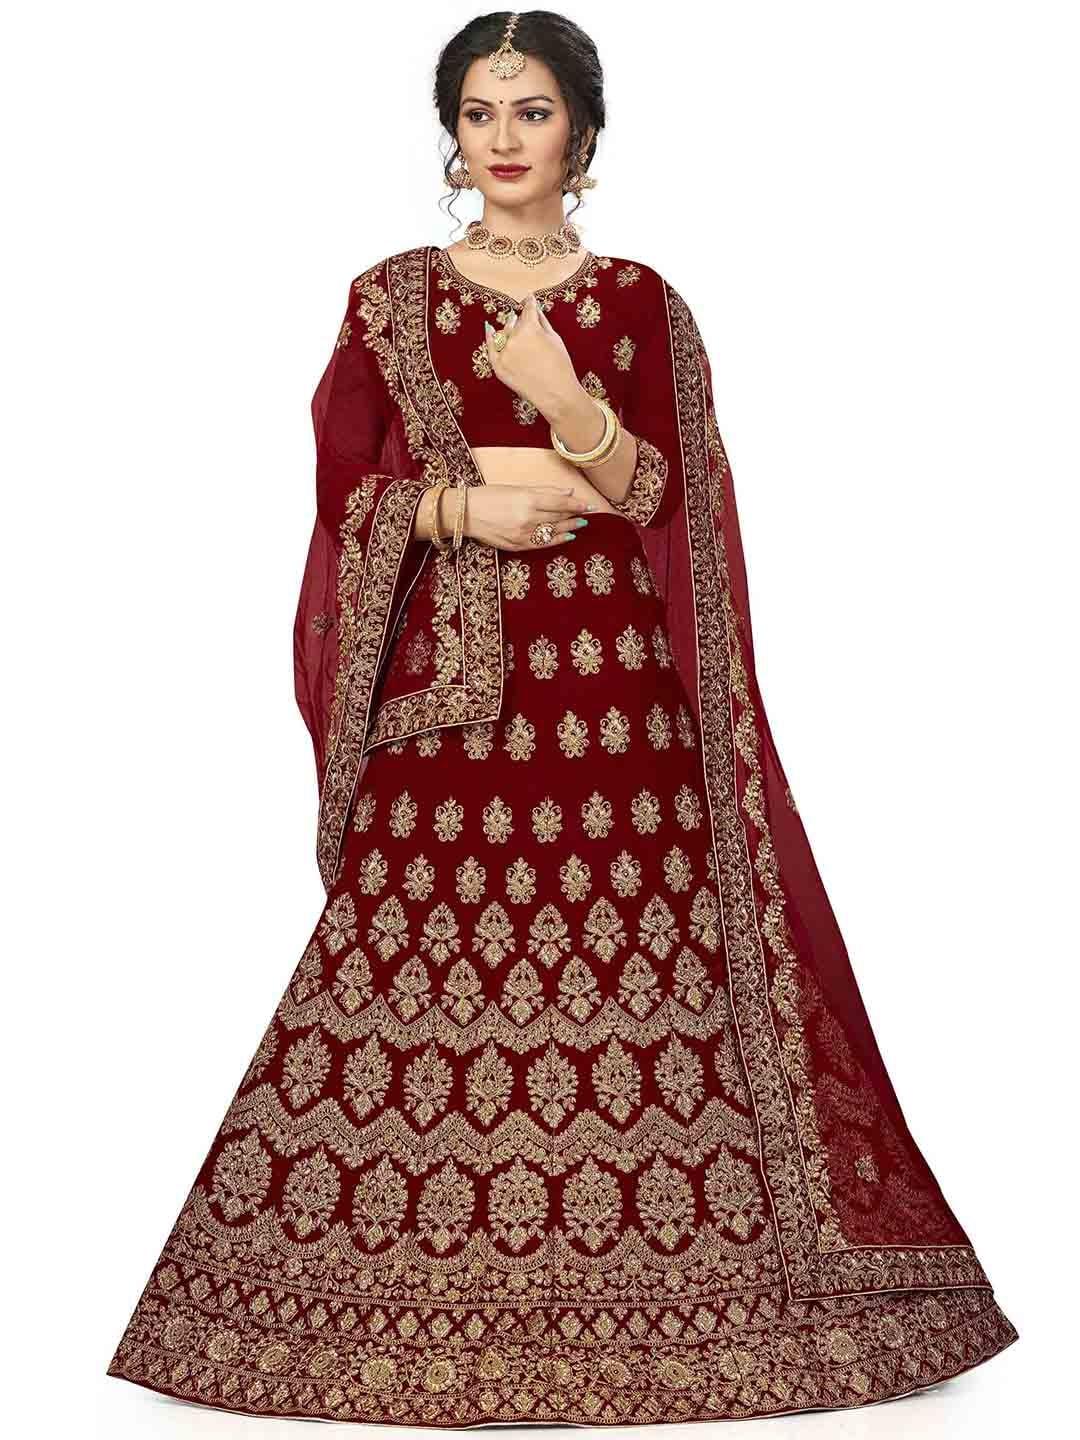 MANVAA Maroon & Gold-Toned Embroidered Thread Work Semi-Stitched Lehenga & Unstitched Blouse With Dupatta